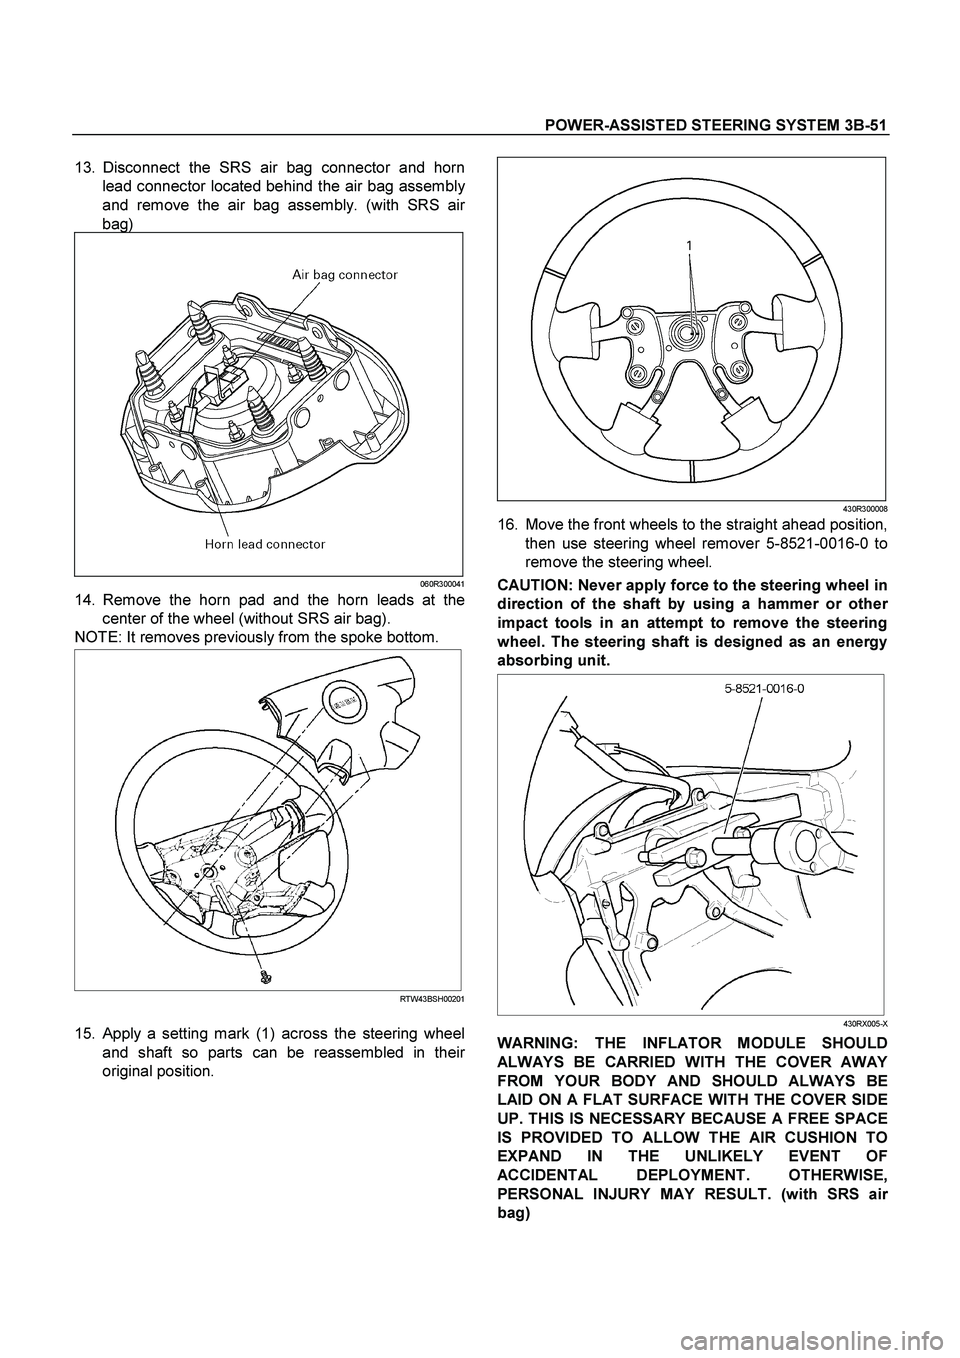 ISUZU TF SERIES 2004 Repair Manual POWER-ASSISTED STEERING SYSTEM 3B-51
 
13. Disconnect the SRS air bag connector and horn
lead connector located behind the air bag assembl
y
and remove the air bag assembly. (with SRS air
bag) 
060R30